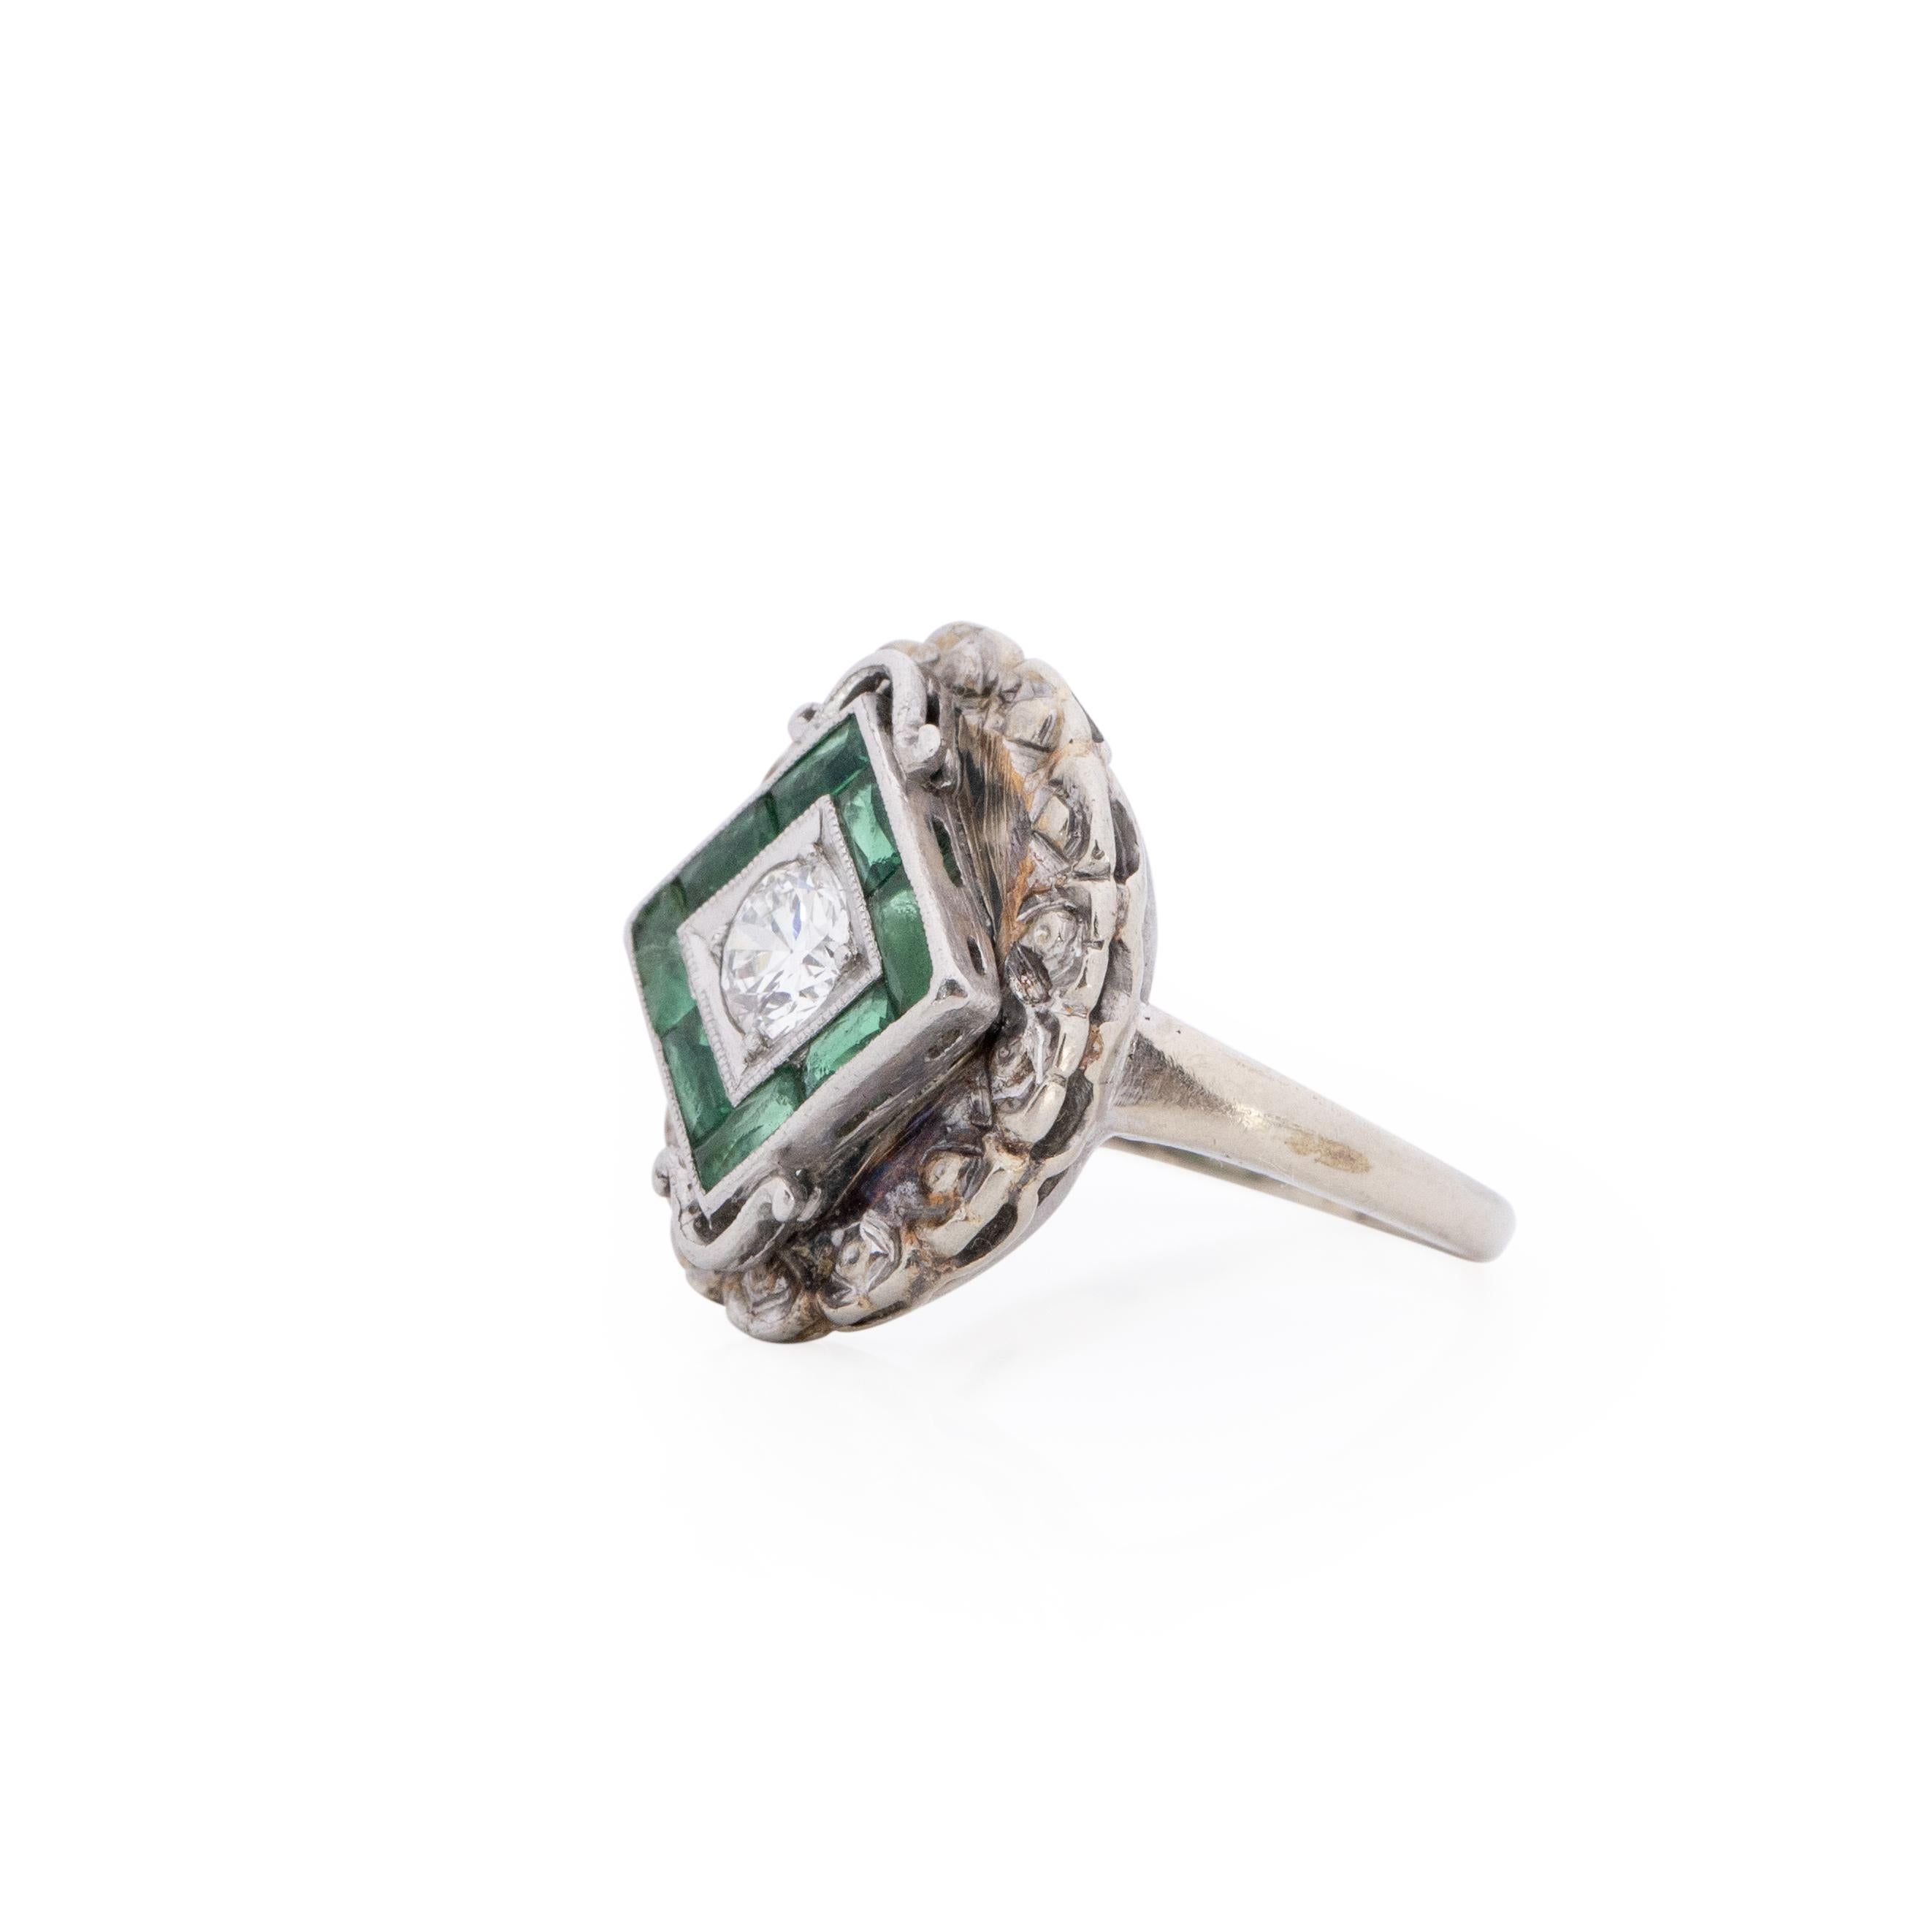 This art deco piece has a beautiful regal edge. Crafted in 10K white gold, in the center of a square baguette emerald halo is a beautiful old European cut diamond. The final details are the scalloped design rounding out the whole small oval shield